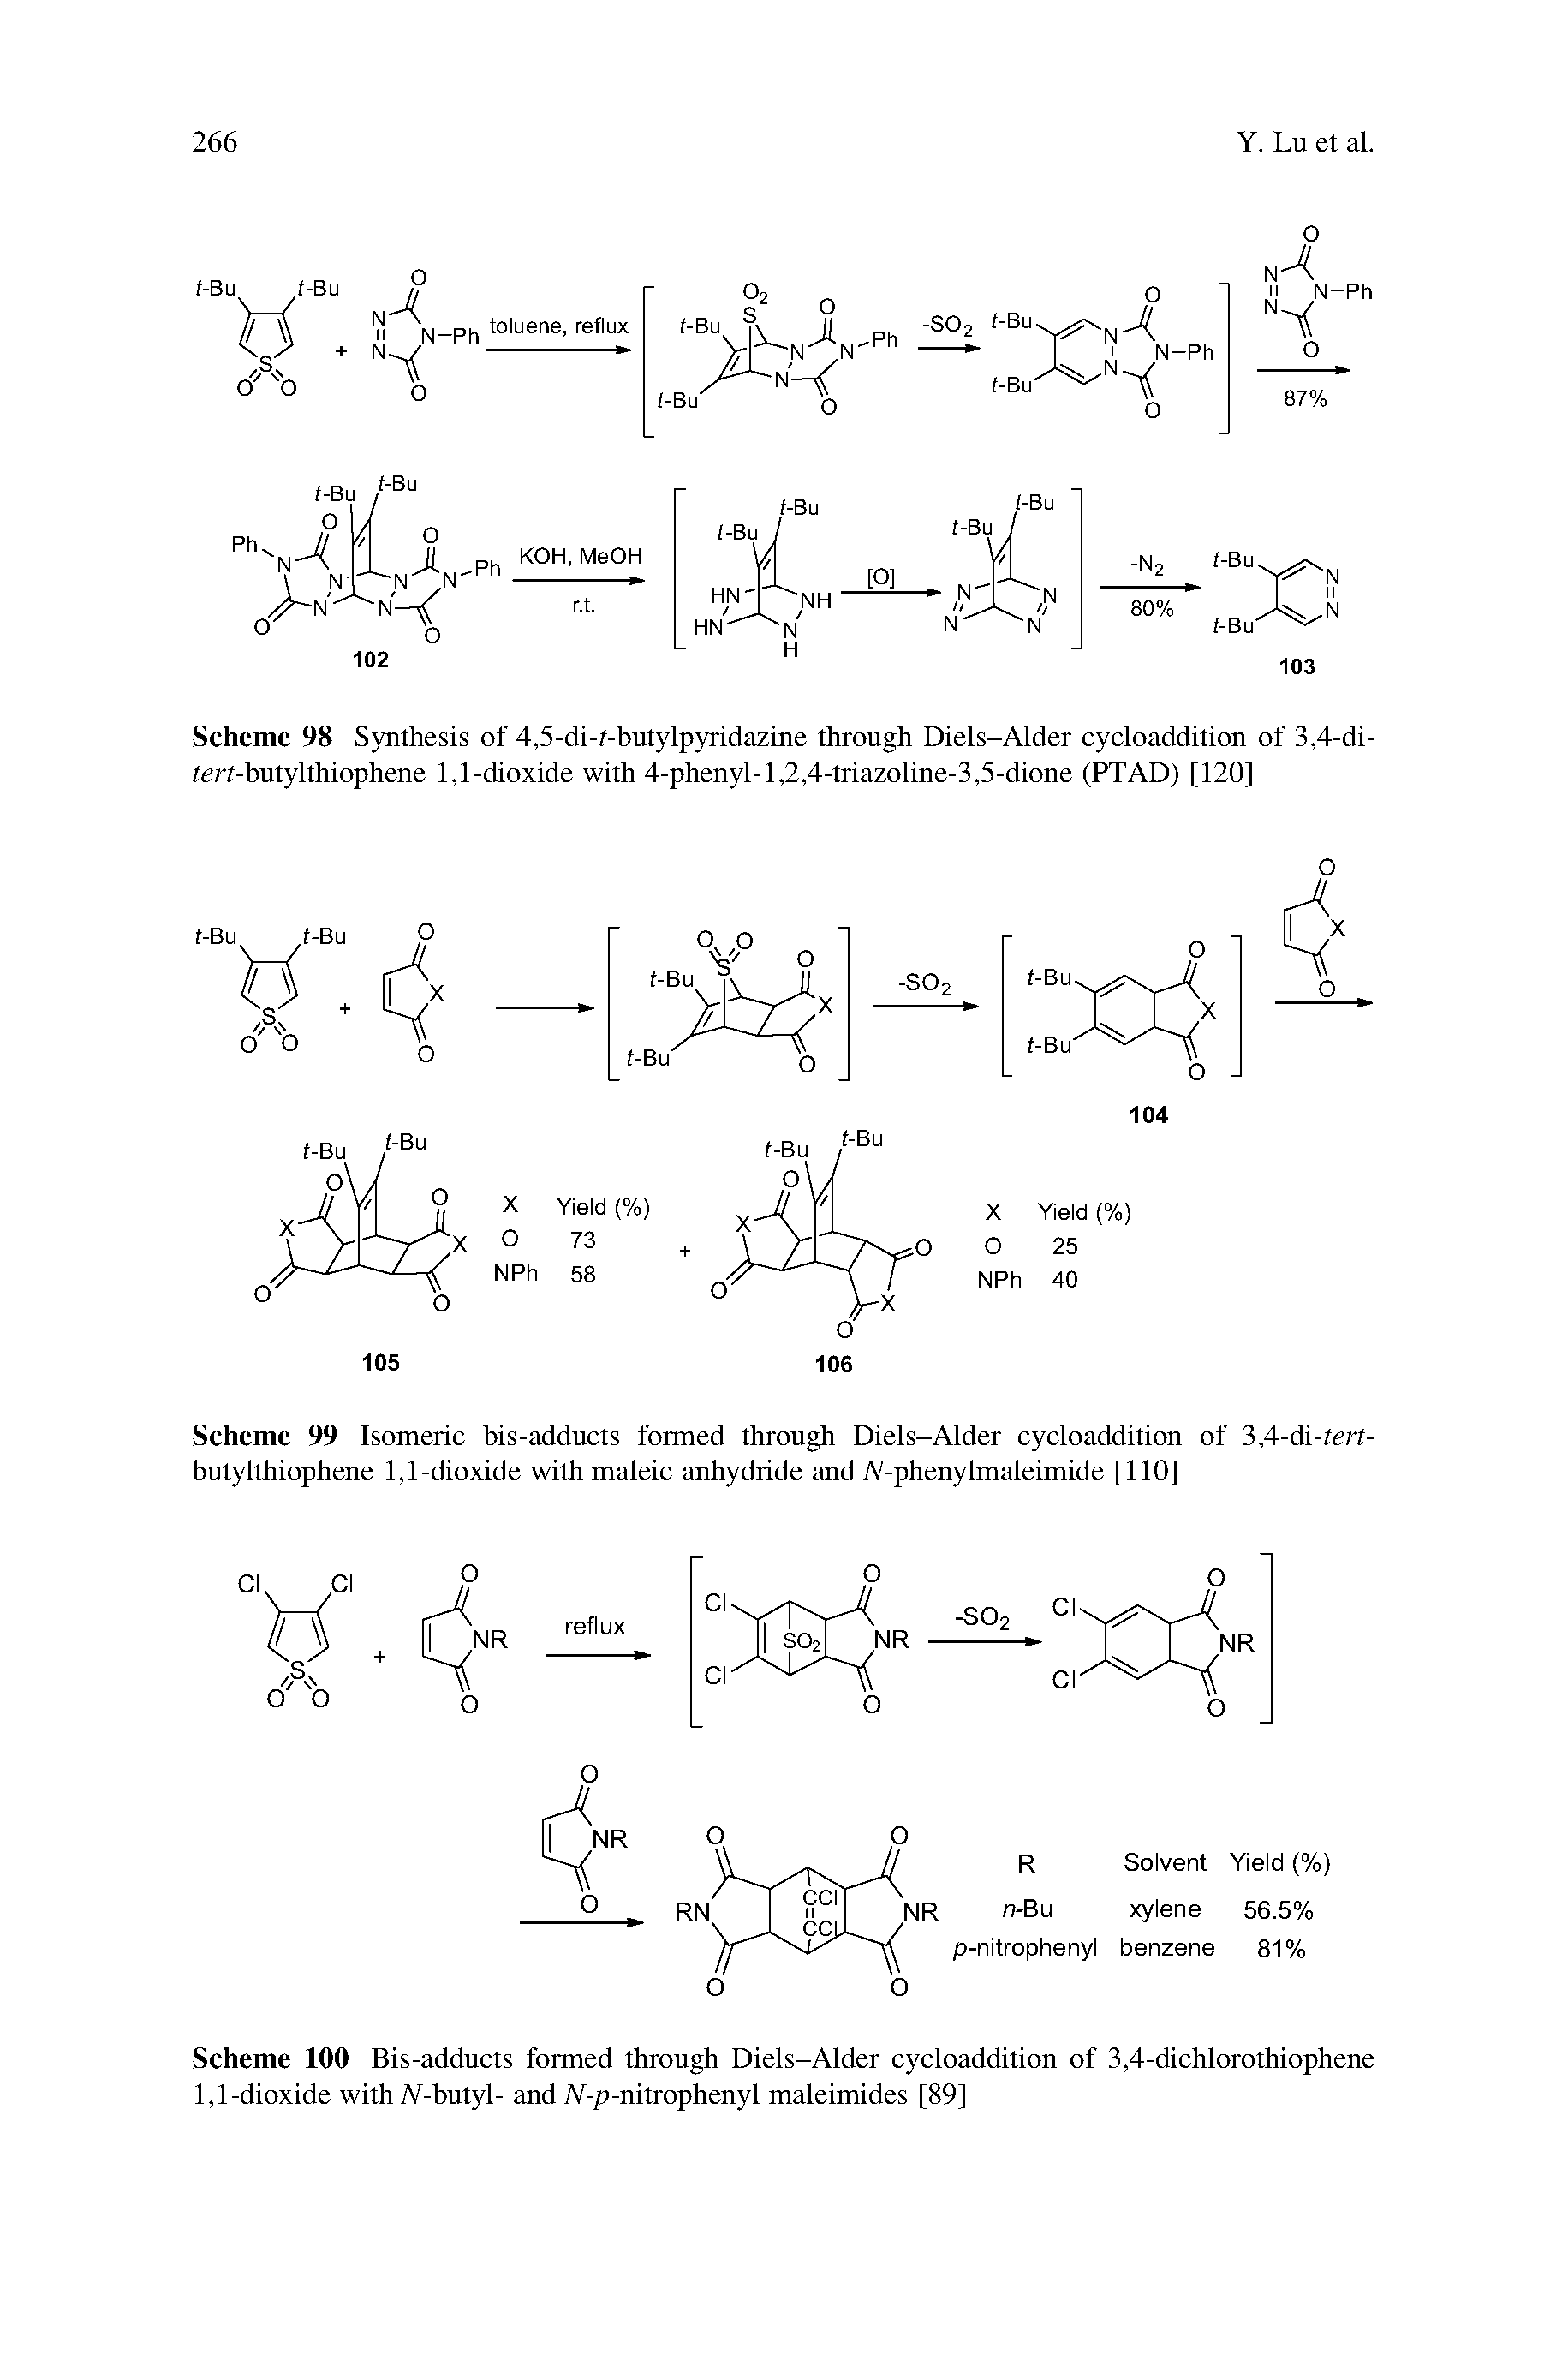 Scheme 98 Synthesis of 4,5-di-t-butylpyridazine through Diels-Alder cycloaddition of 3,4-di-tert-butylthiophene 1,1-dioxide with 4-phenyl-l,2,4-triazoline-3,5-dione (PTAD) [120]...